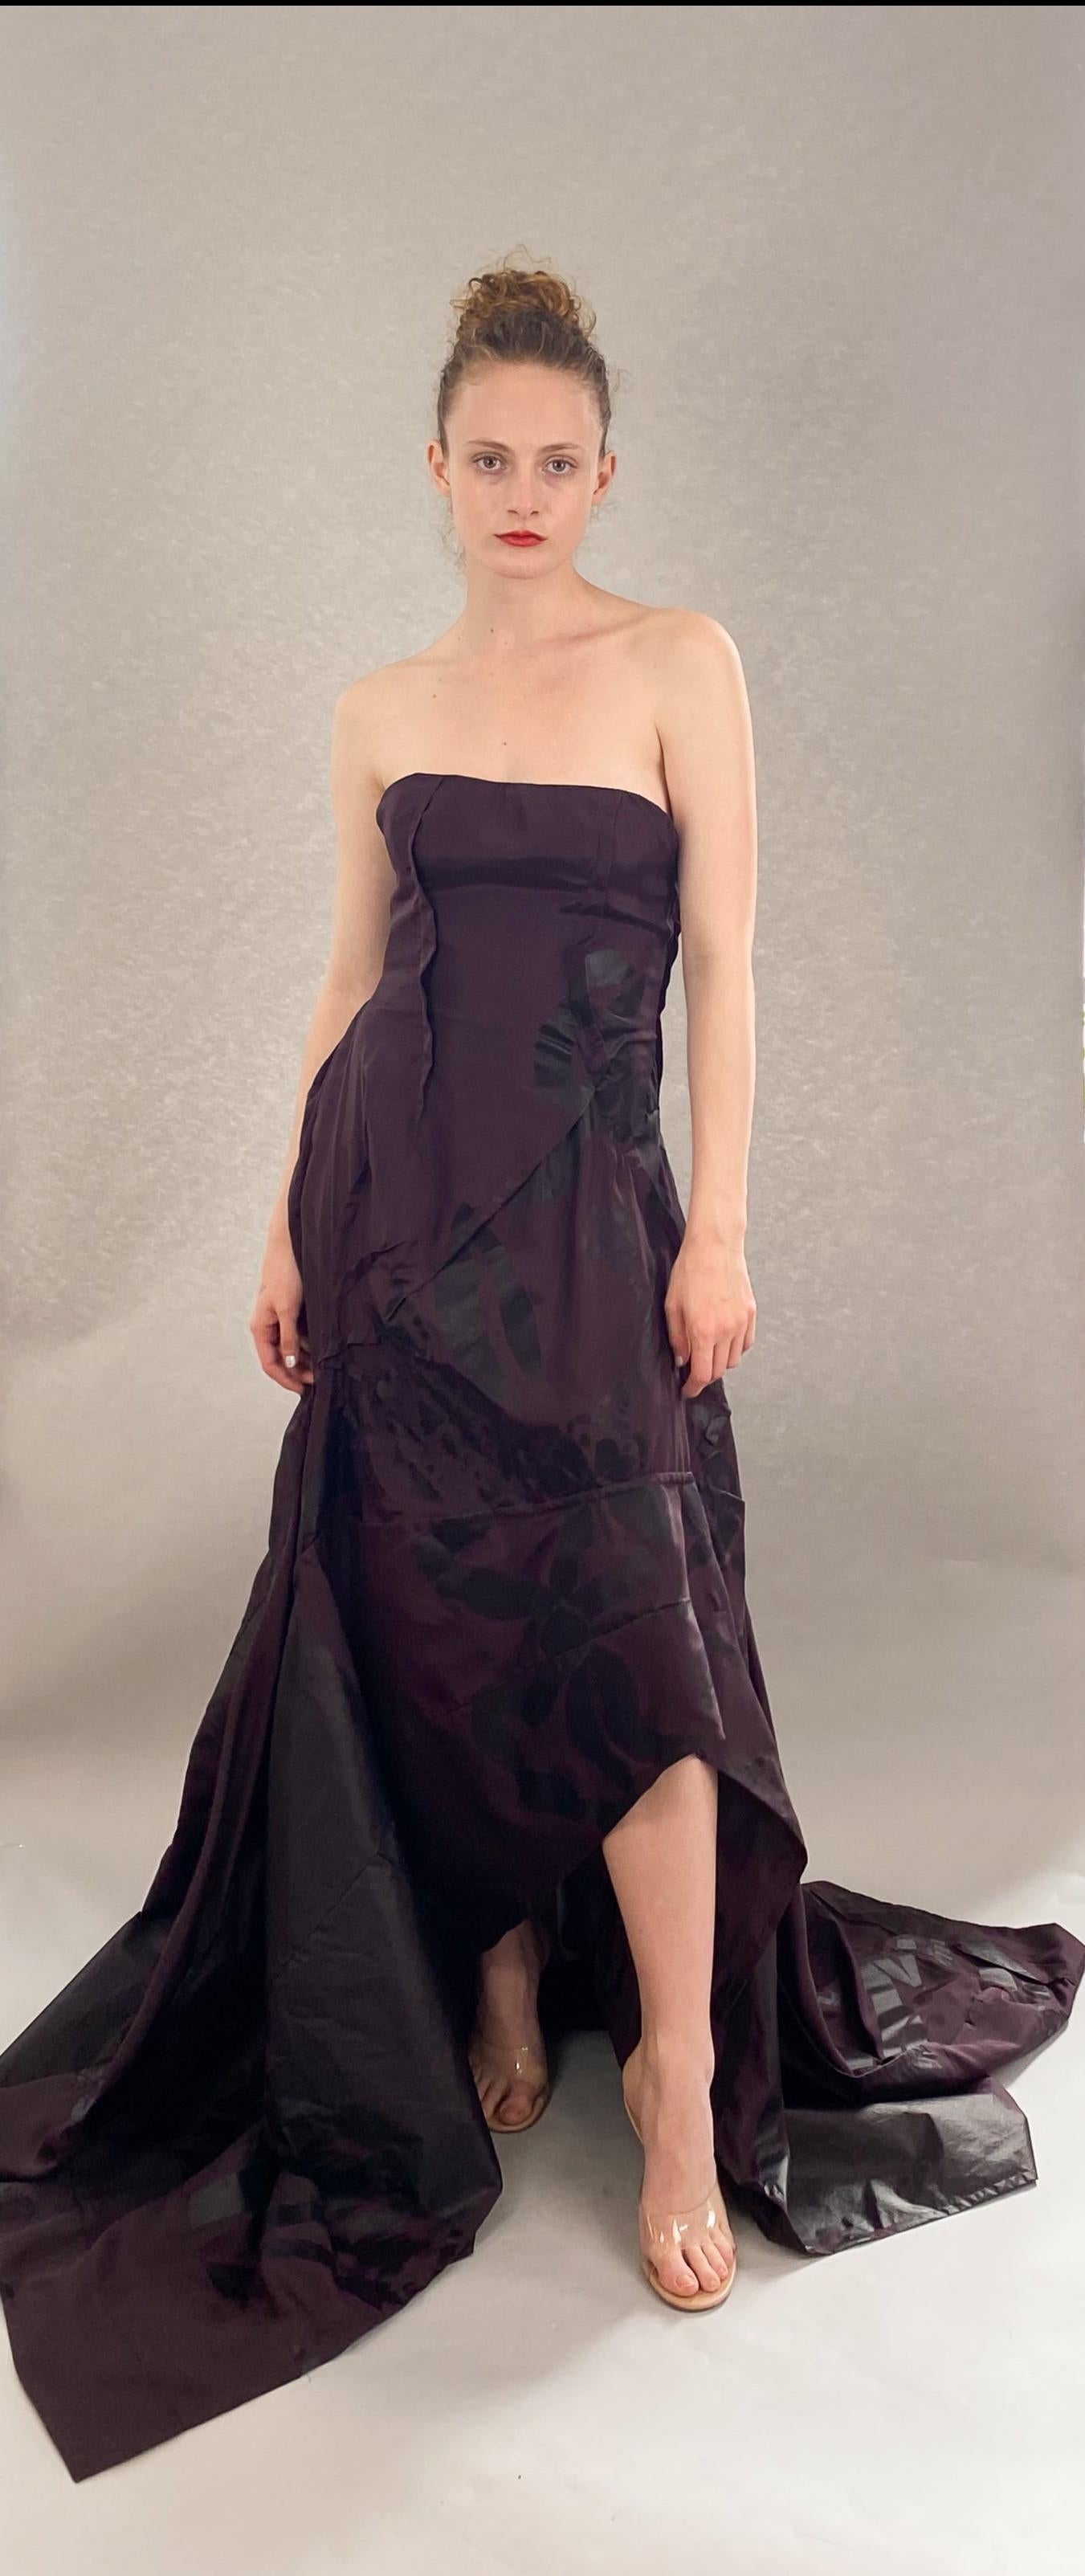 Women's Christian Dior by John Galliano Fall 2006 Strapless Gown For Sale